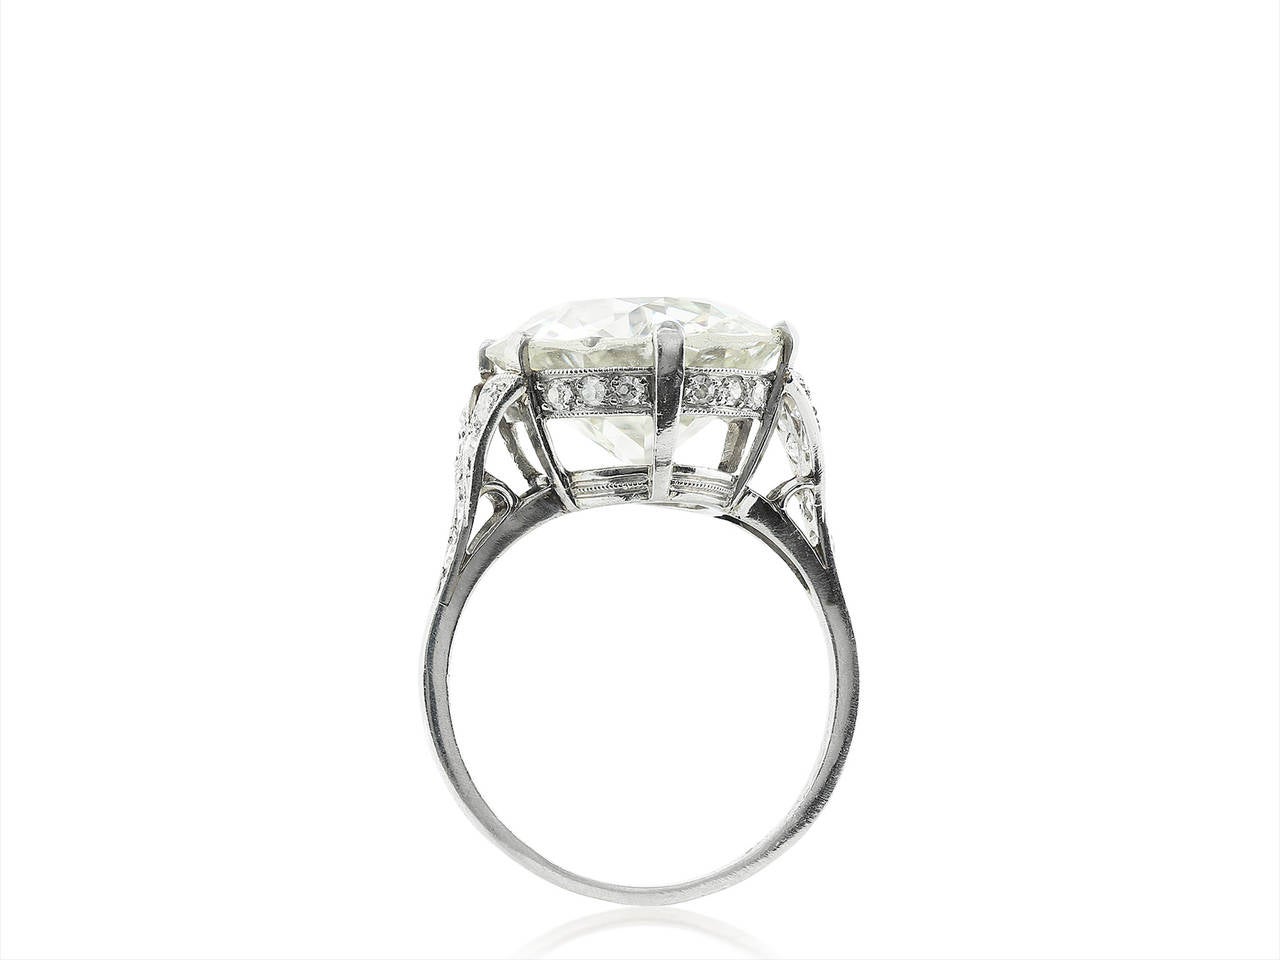 Platinum style solitaire ring consisting of 1 Old European cut diamond weighing 7.56 carats having a color and clarity of K/SI2, measuring 12.99 - 12.84 x 7.08mm with EGL certificate US910427912D, the stone is set with Old European cut diamond